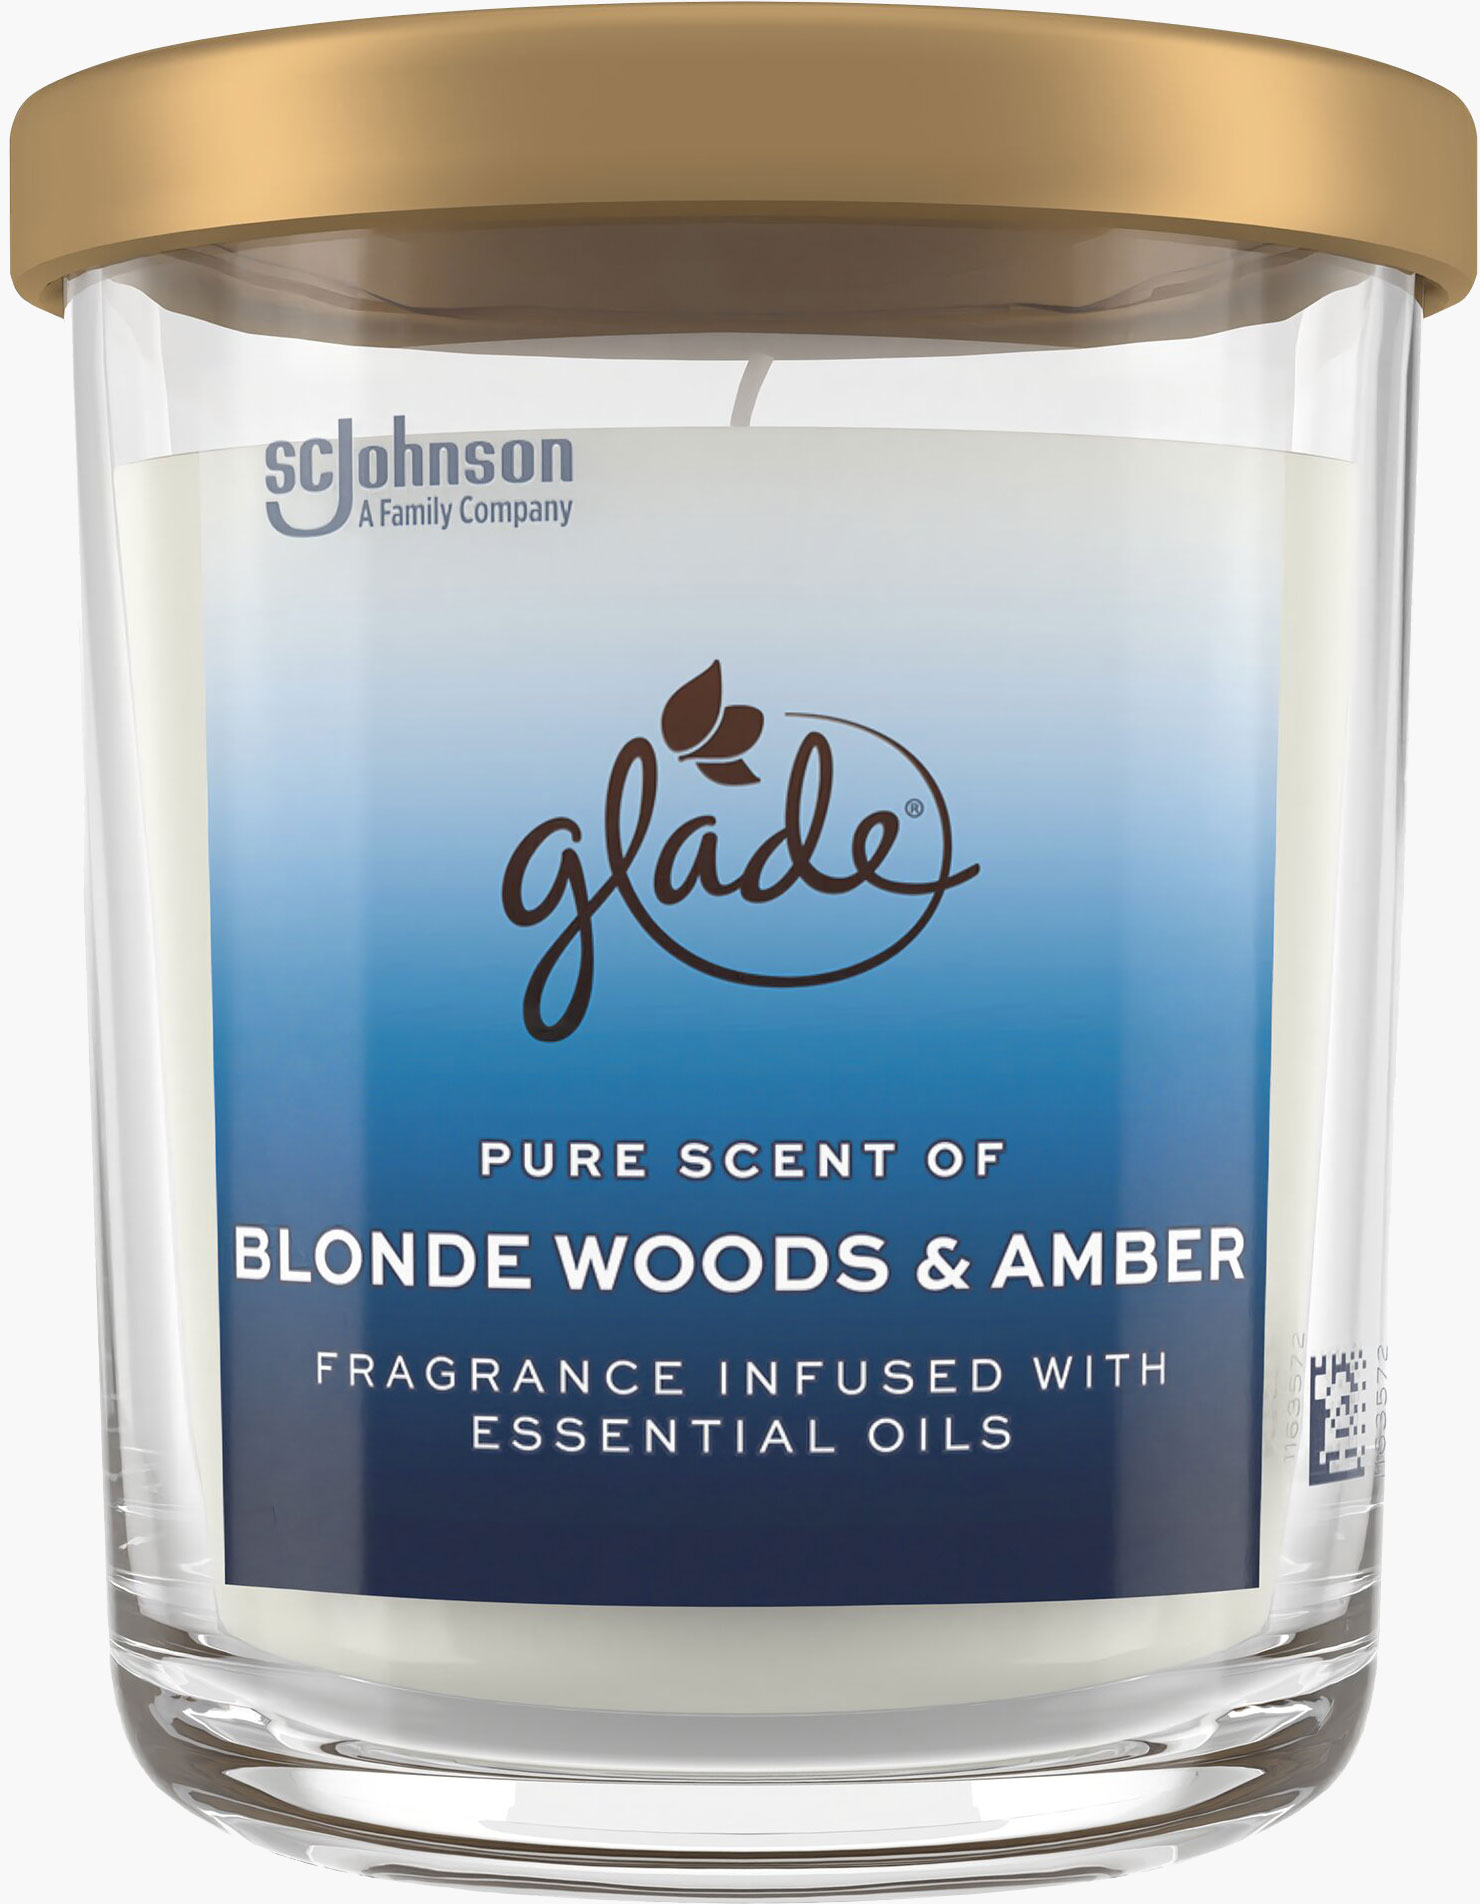 Glade® Blonde Woods & Amber Candle